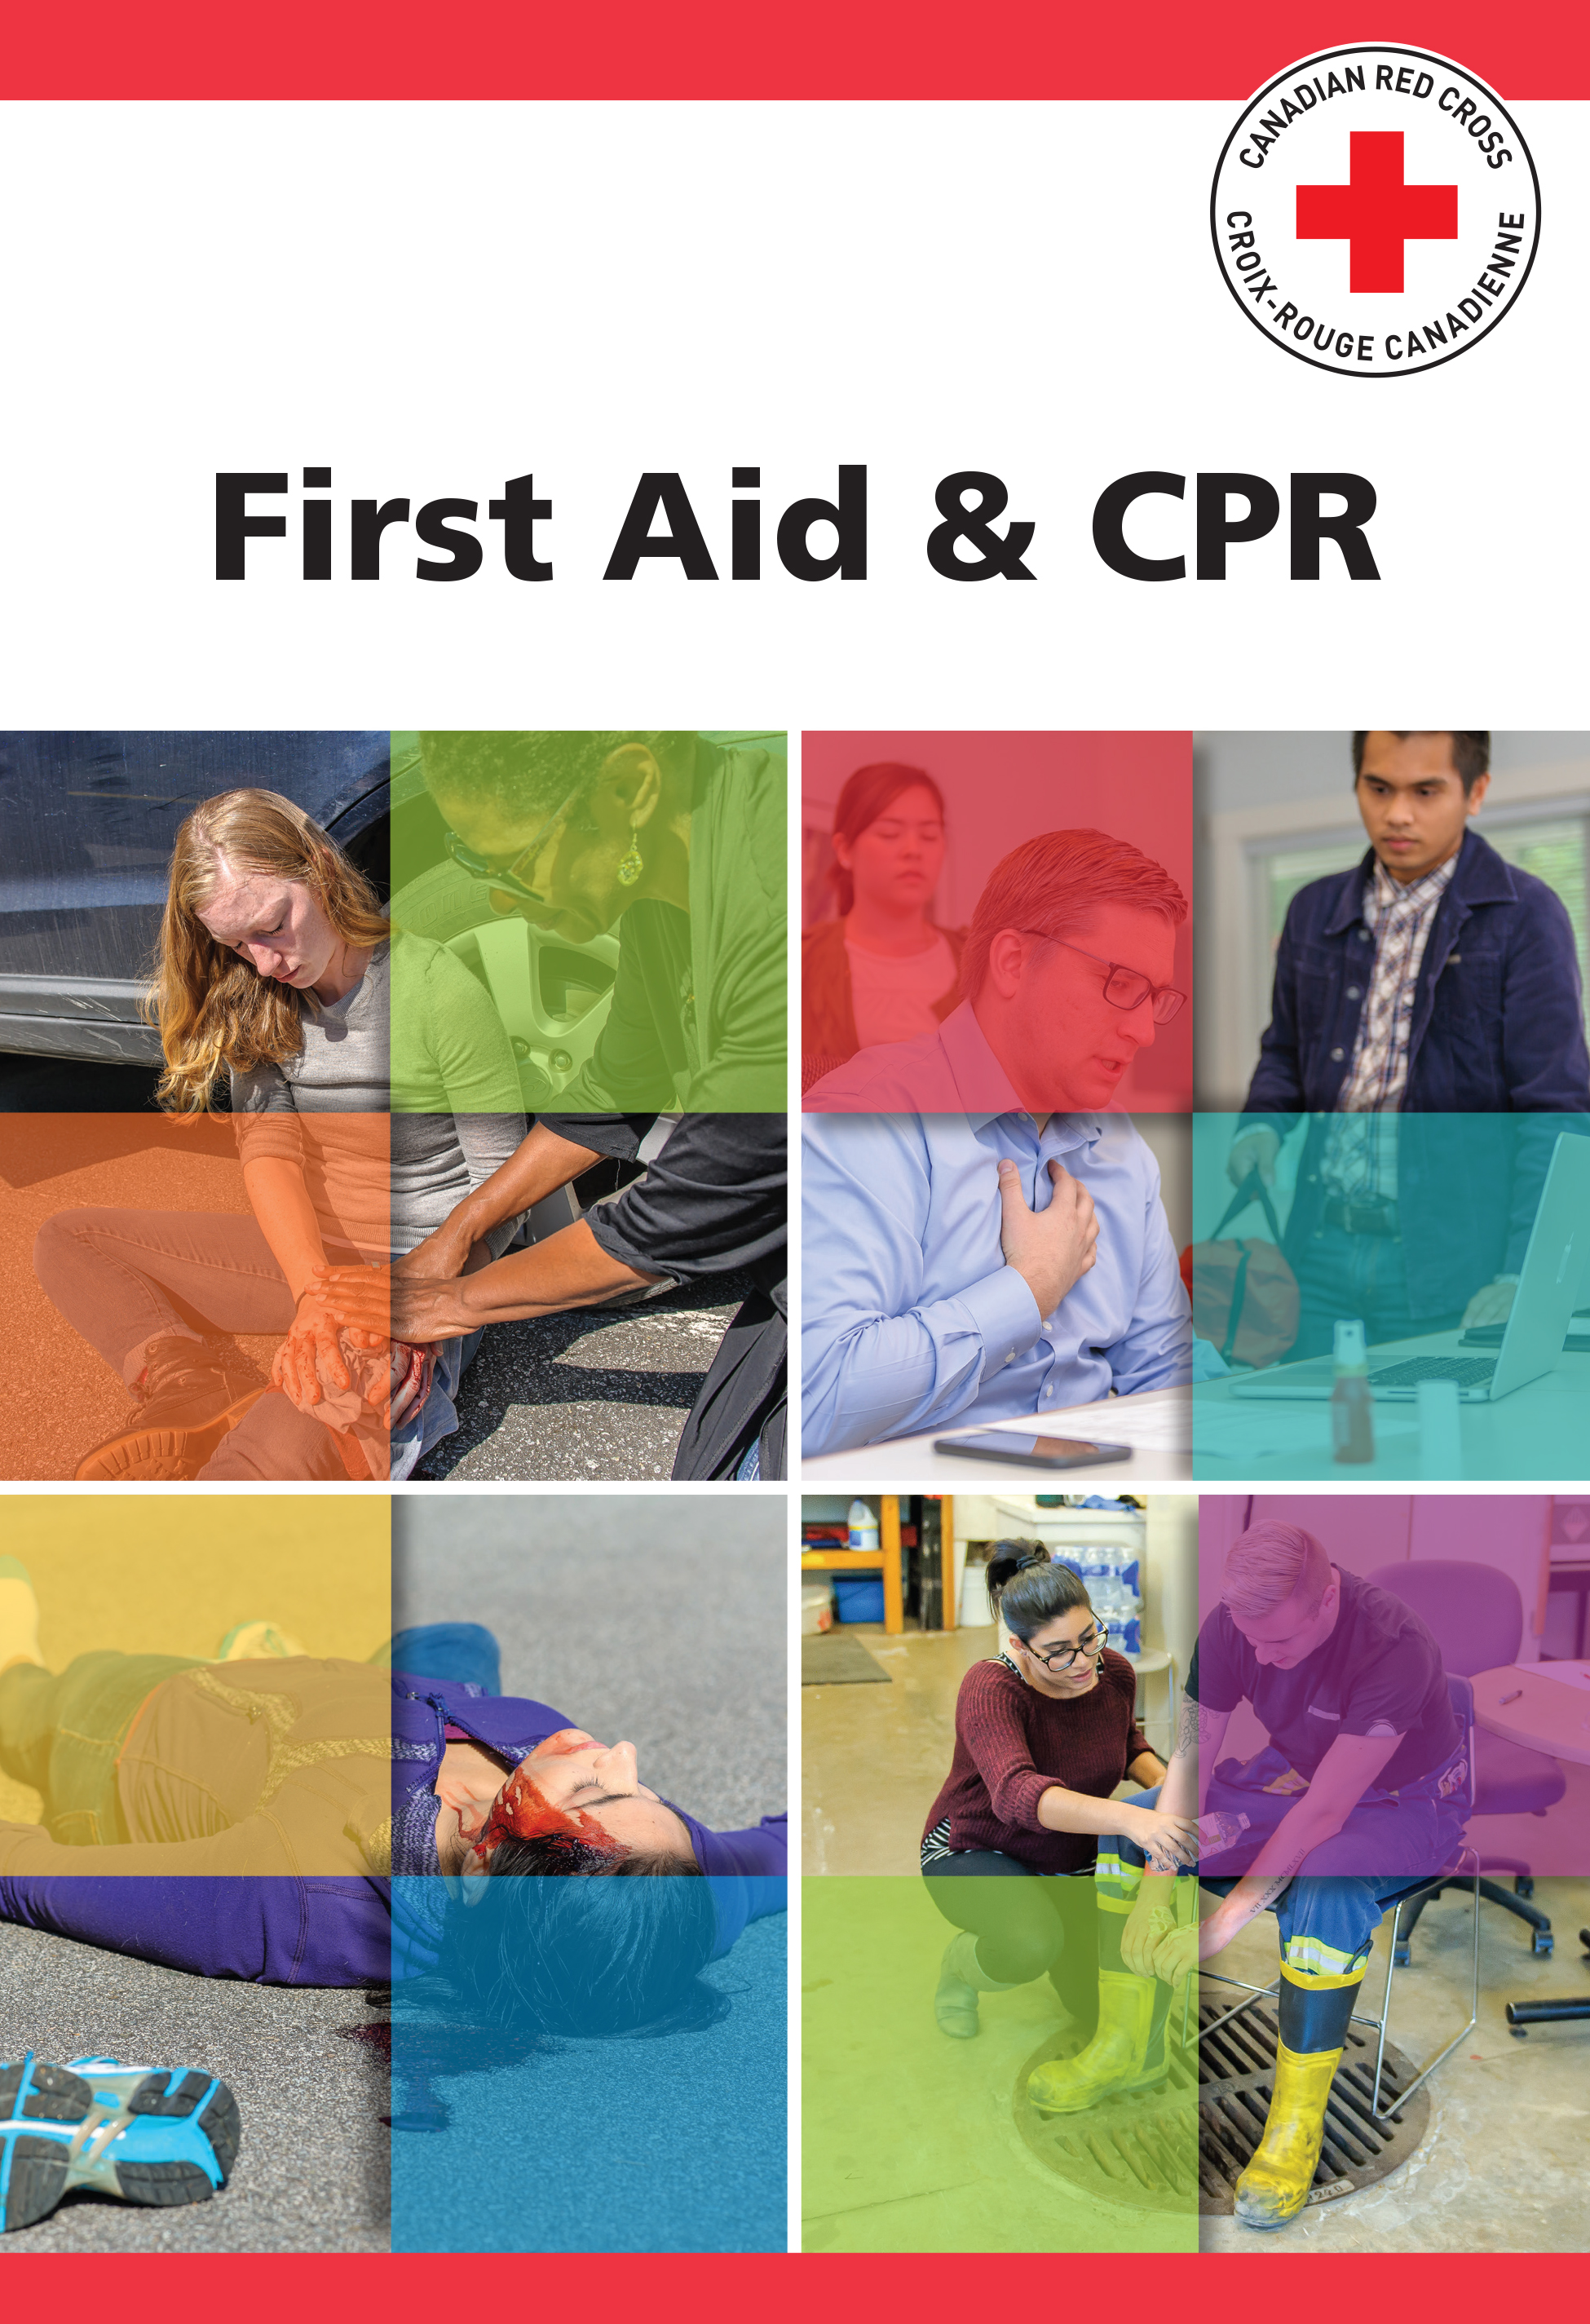 First Aid Course Materials for Marine Basic First Aid Course - CPR (Blended) in Burnaby